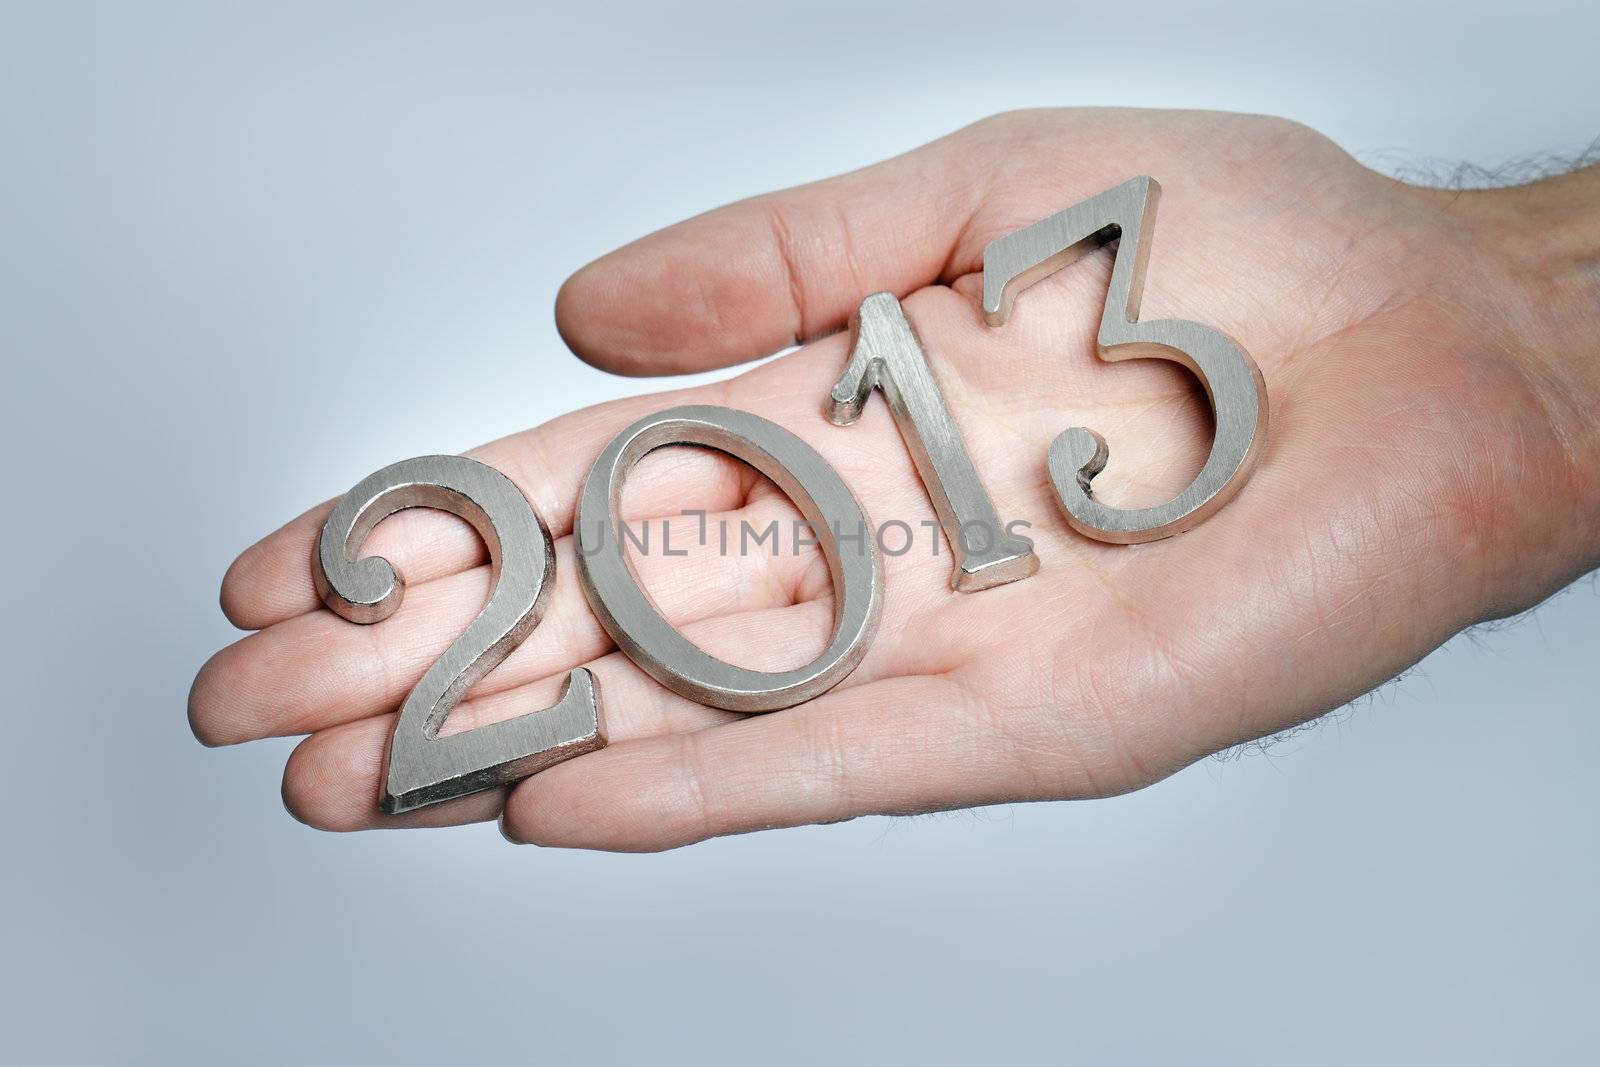 Man holding metallic numbersfor year 2013 in his hand.